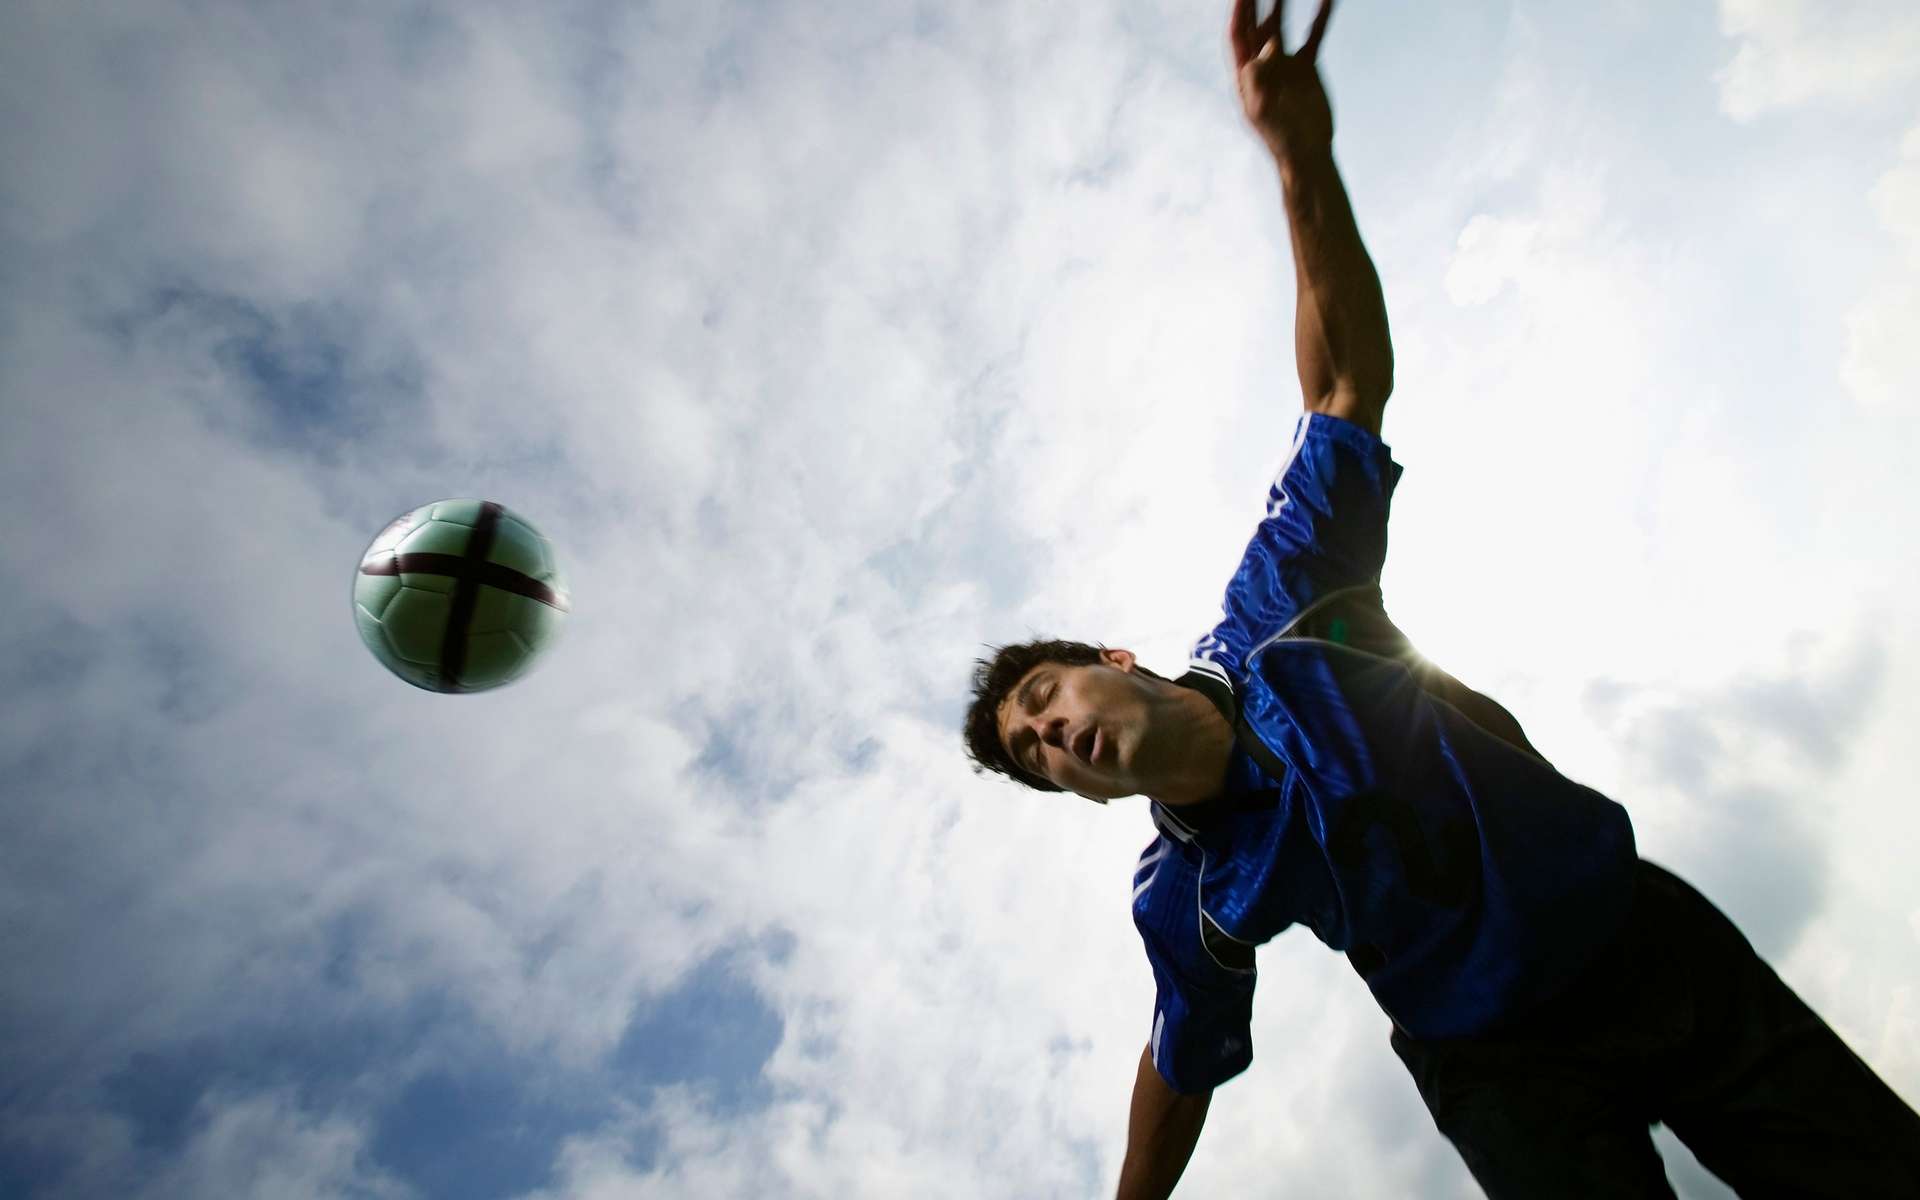 Playing football puts players at increased risk of dementia